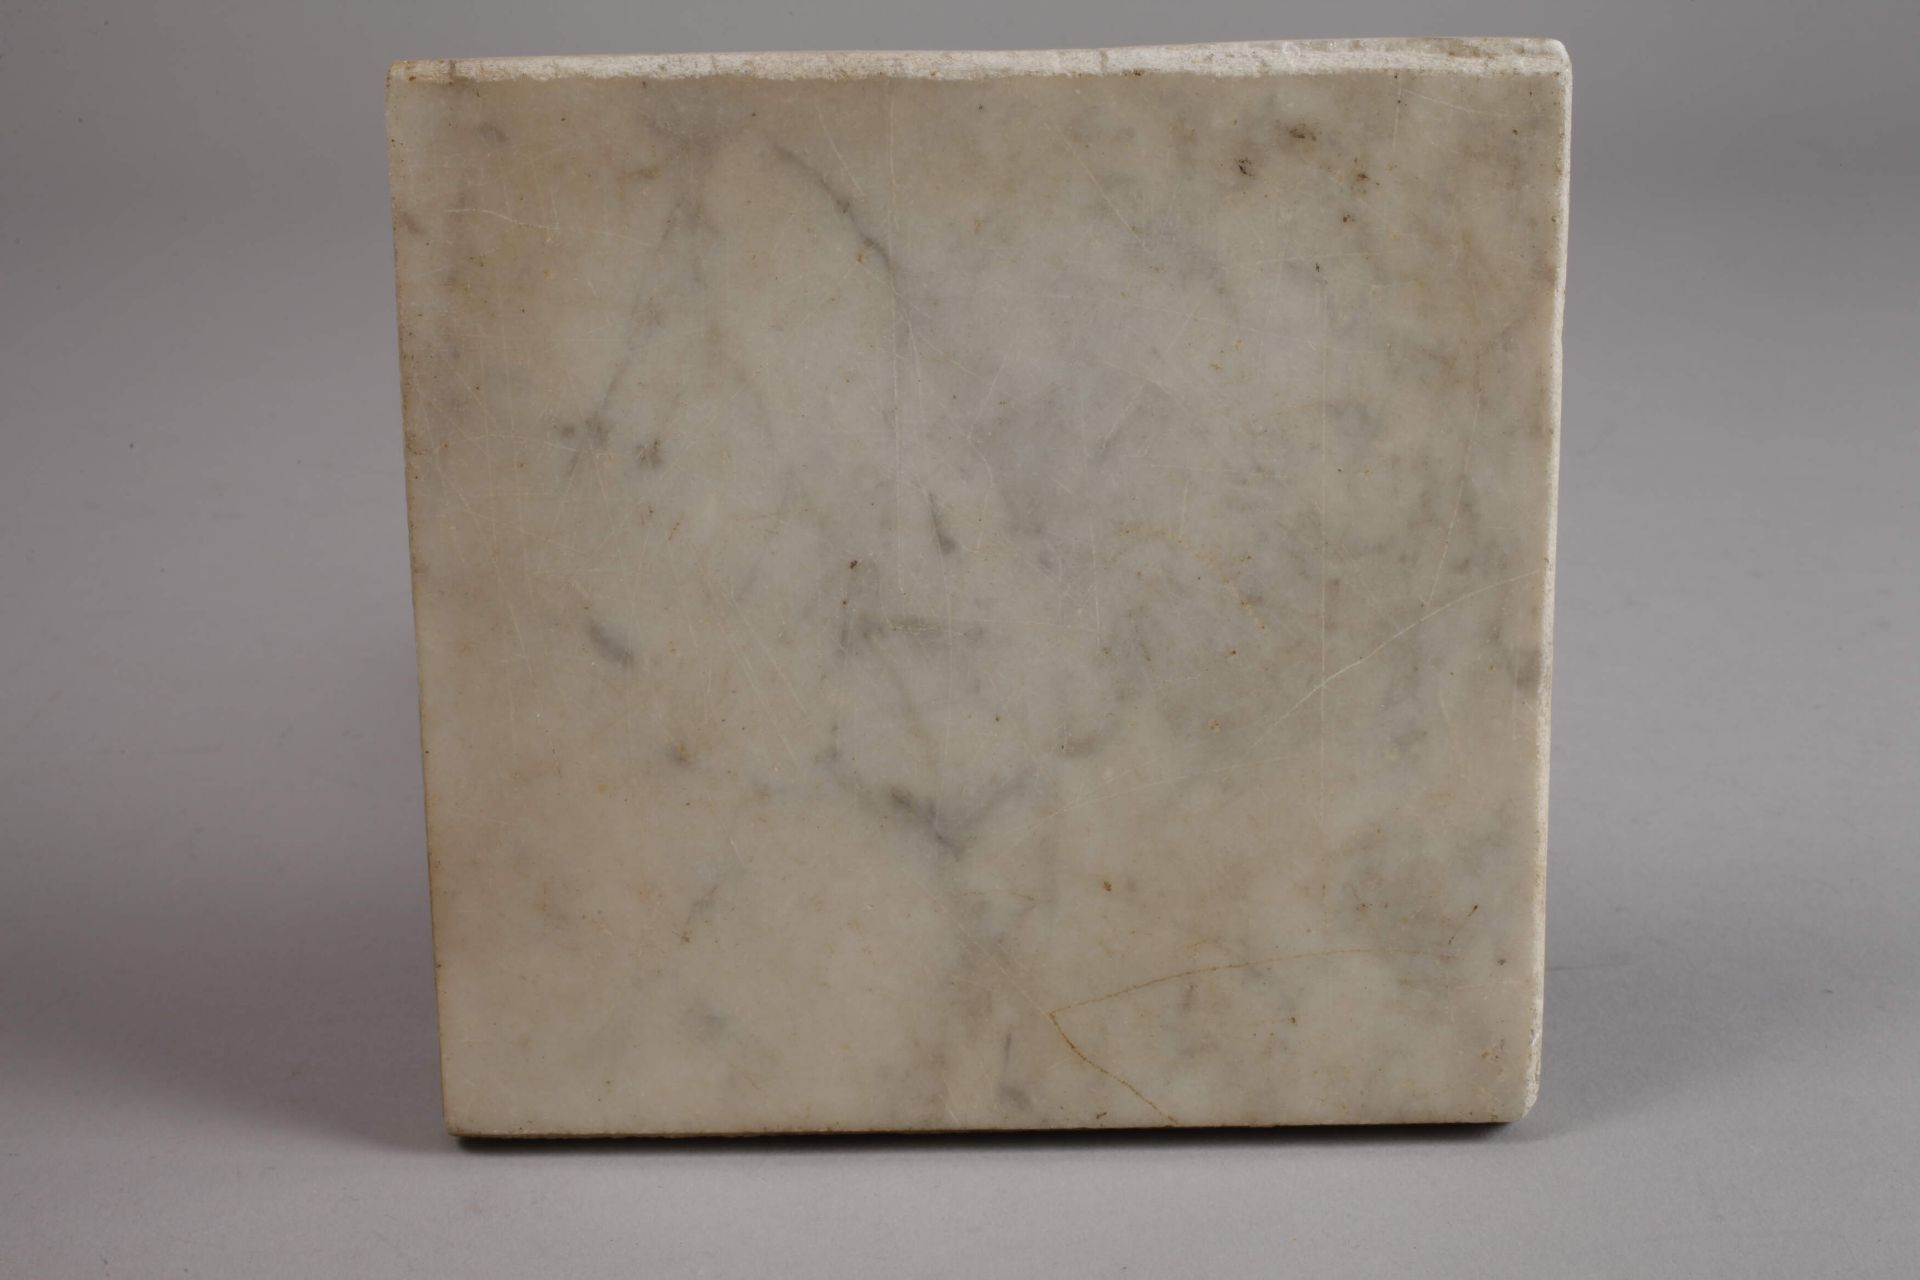 Marble tile with antique portrait - Image 3 of 3